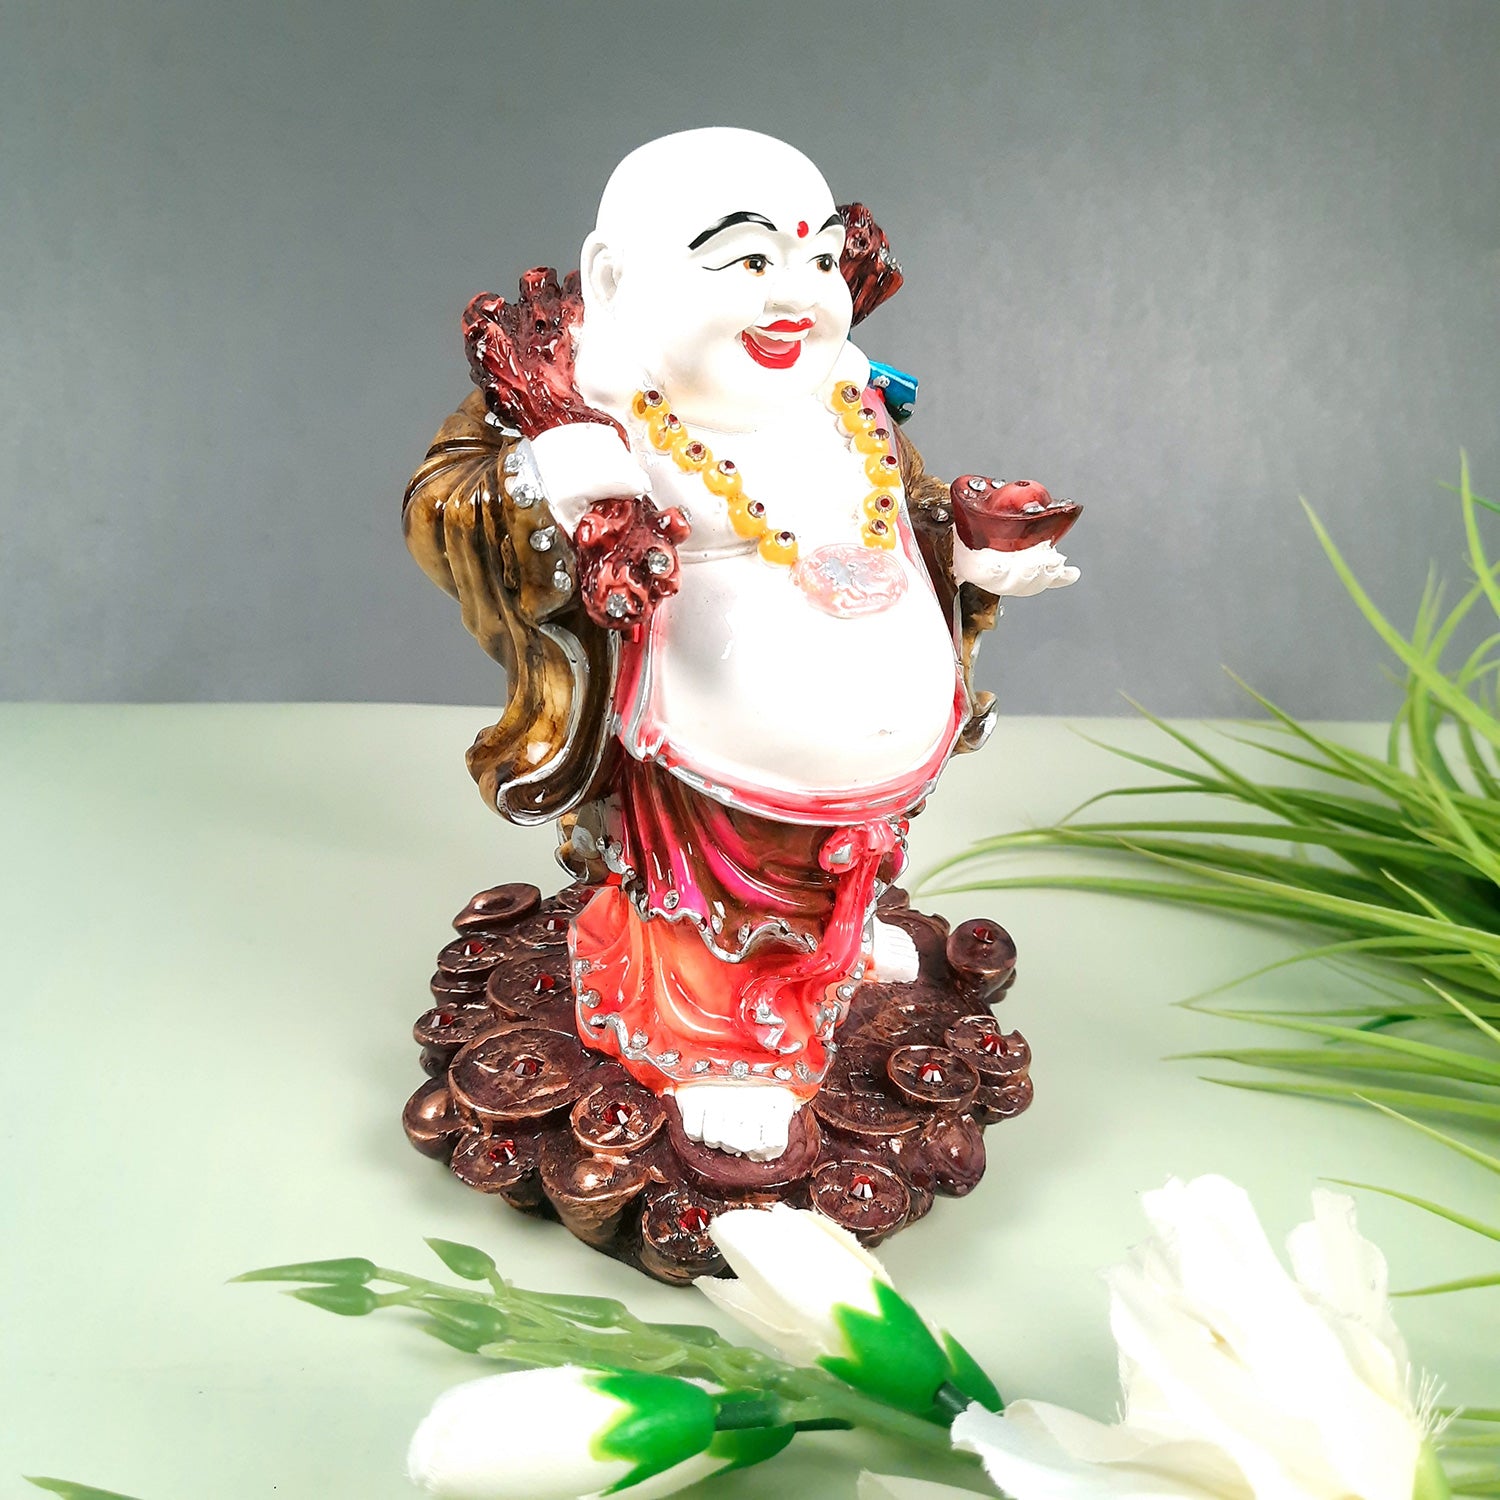 Laughing Buddha Showpiece With Money Bag - Standing On Coins Designs | Happy Man Fen Shui Statue For Money, Wealth & Prosperity - For Vastu, Home, Table & Office Decor & Gift - 9 Inch - Apkamart